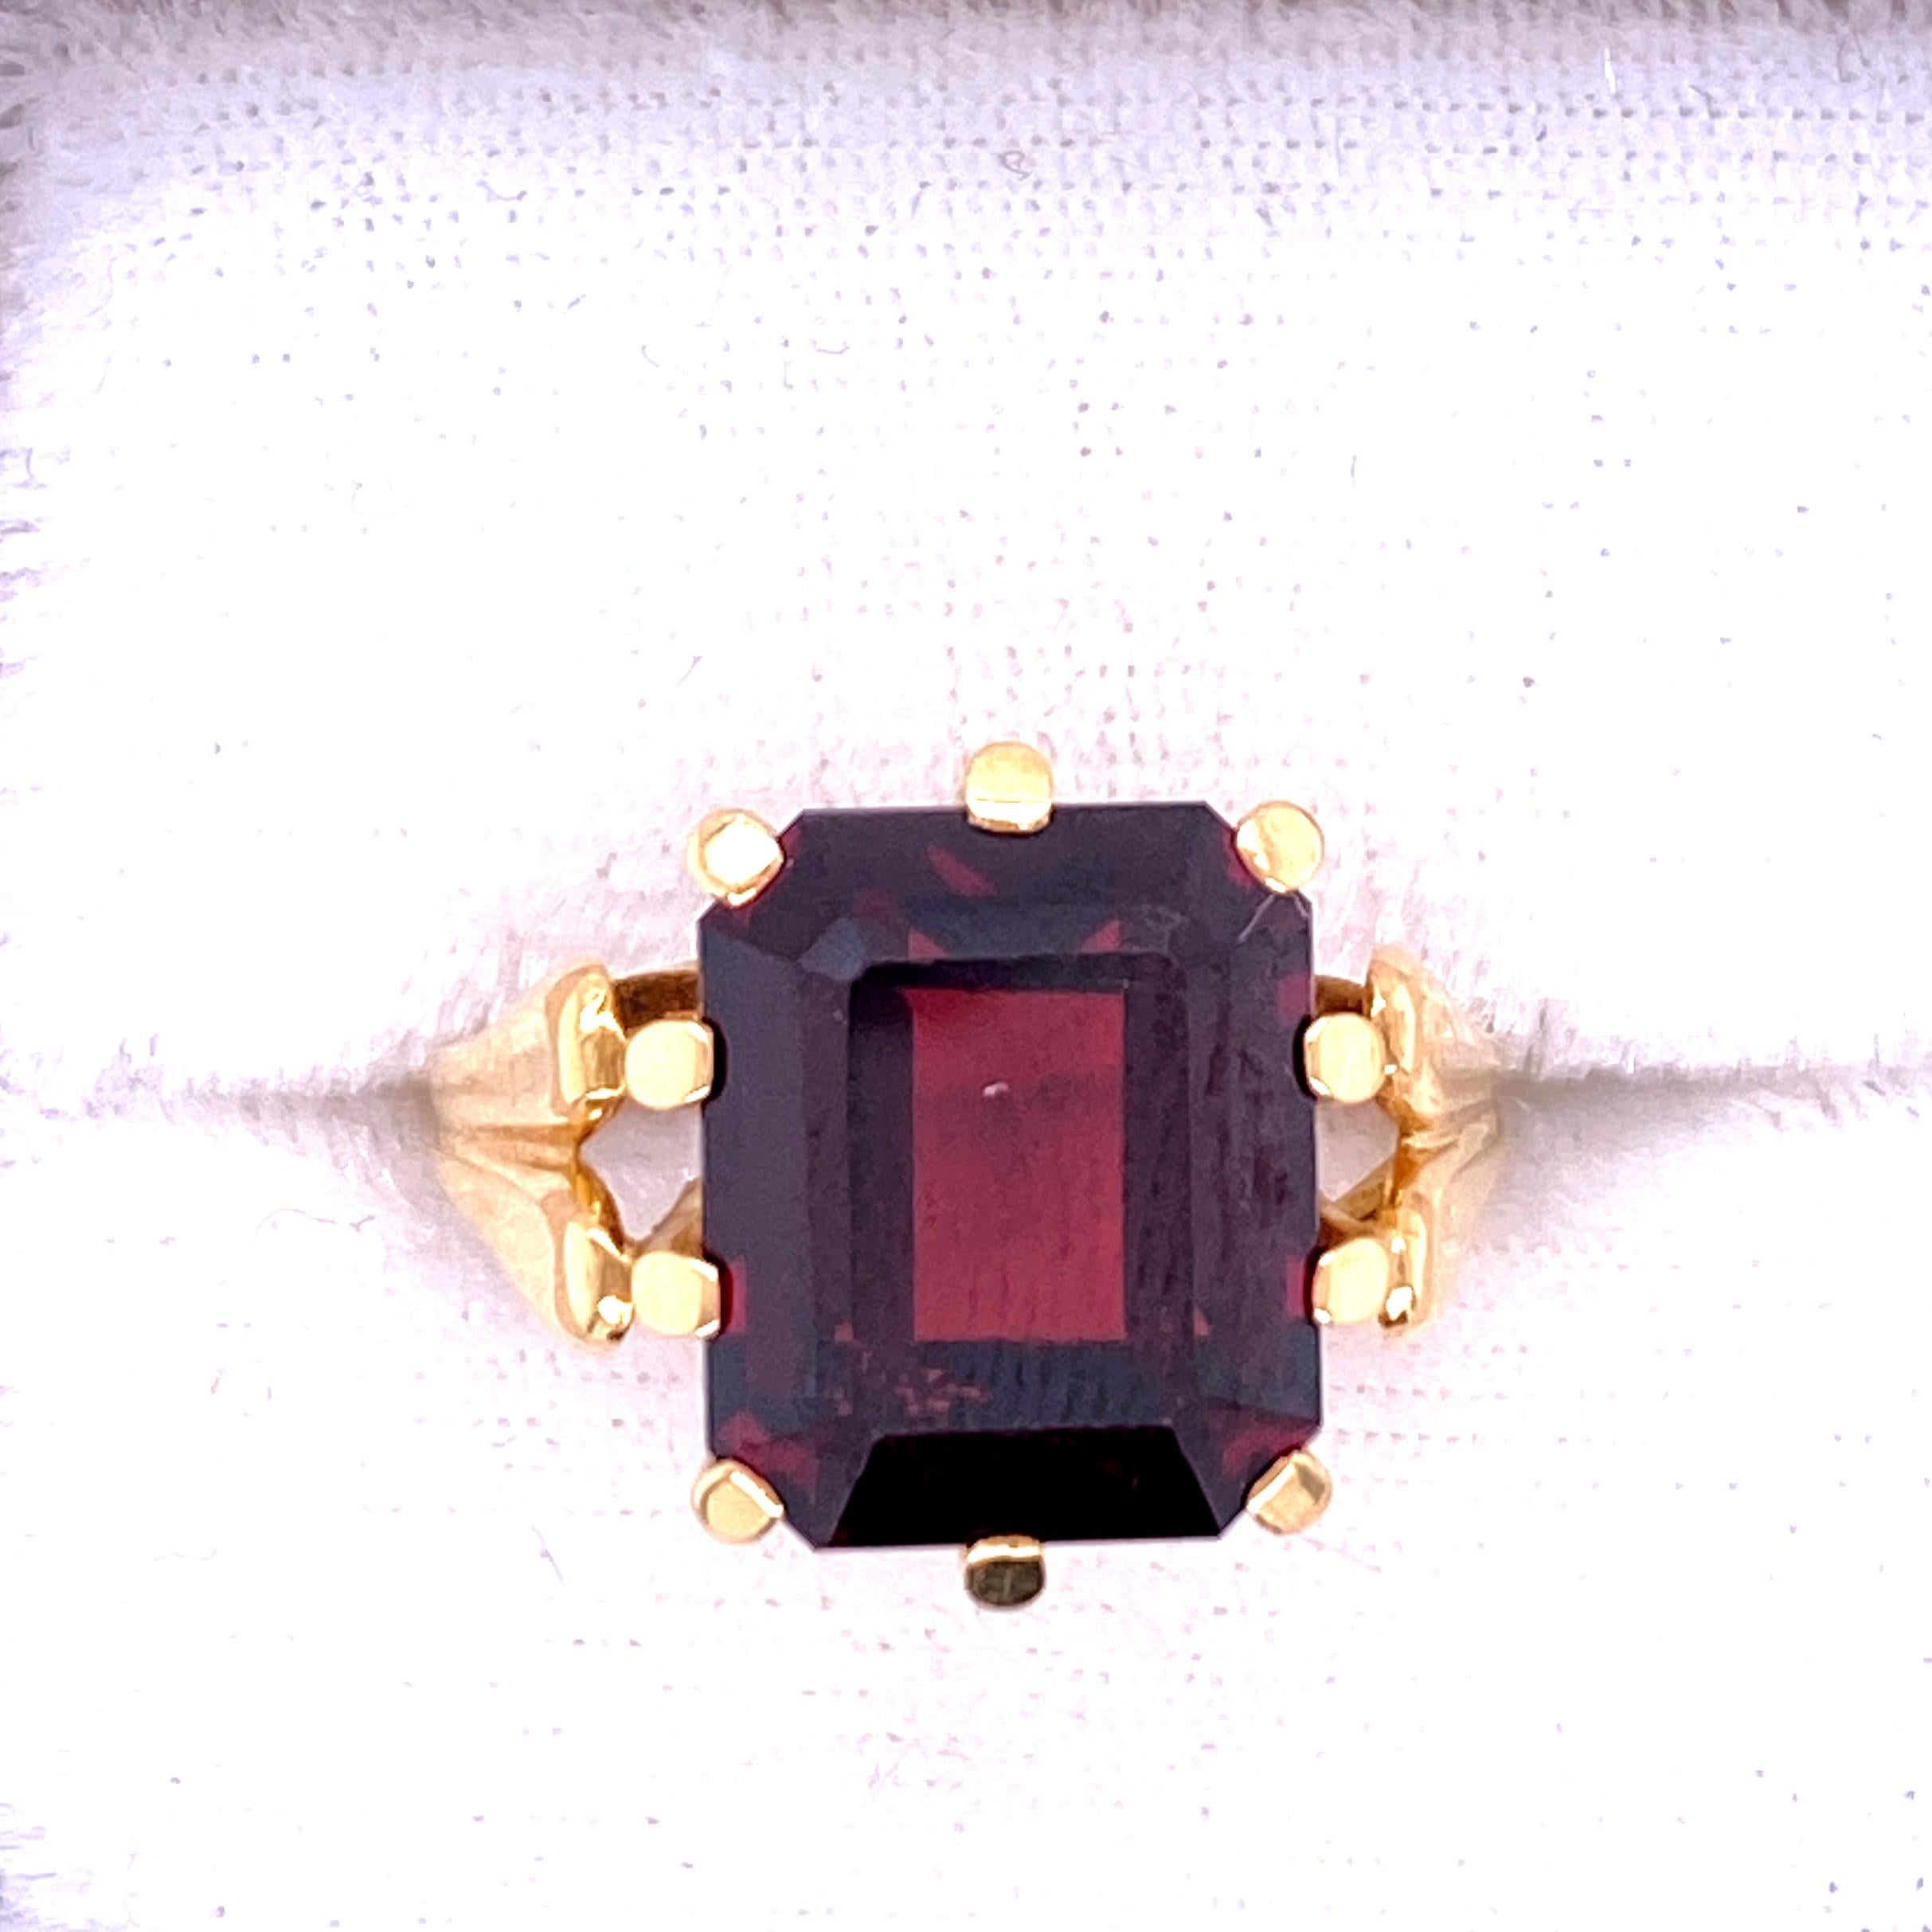 One 18 karat yellow gold (stamped 750 HFW) ring prong set with one 12 x 10mm emerald cut garnet.  The shank measures 6.6mm near the top of the ring and tapers to 1.5mm at the base.  The ring is a finger size 5.25.  Circa 1960s. 